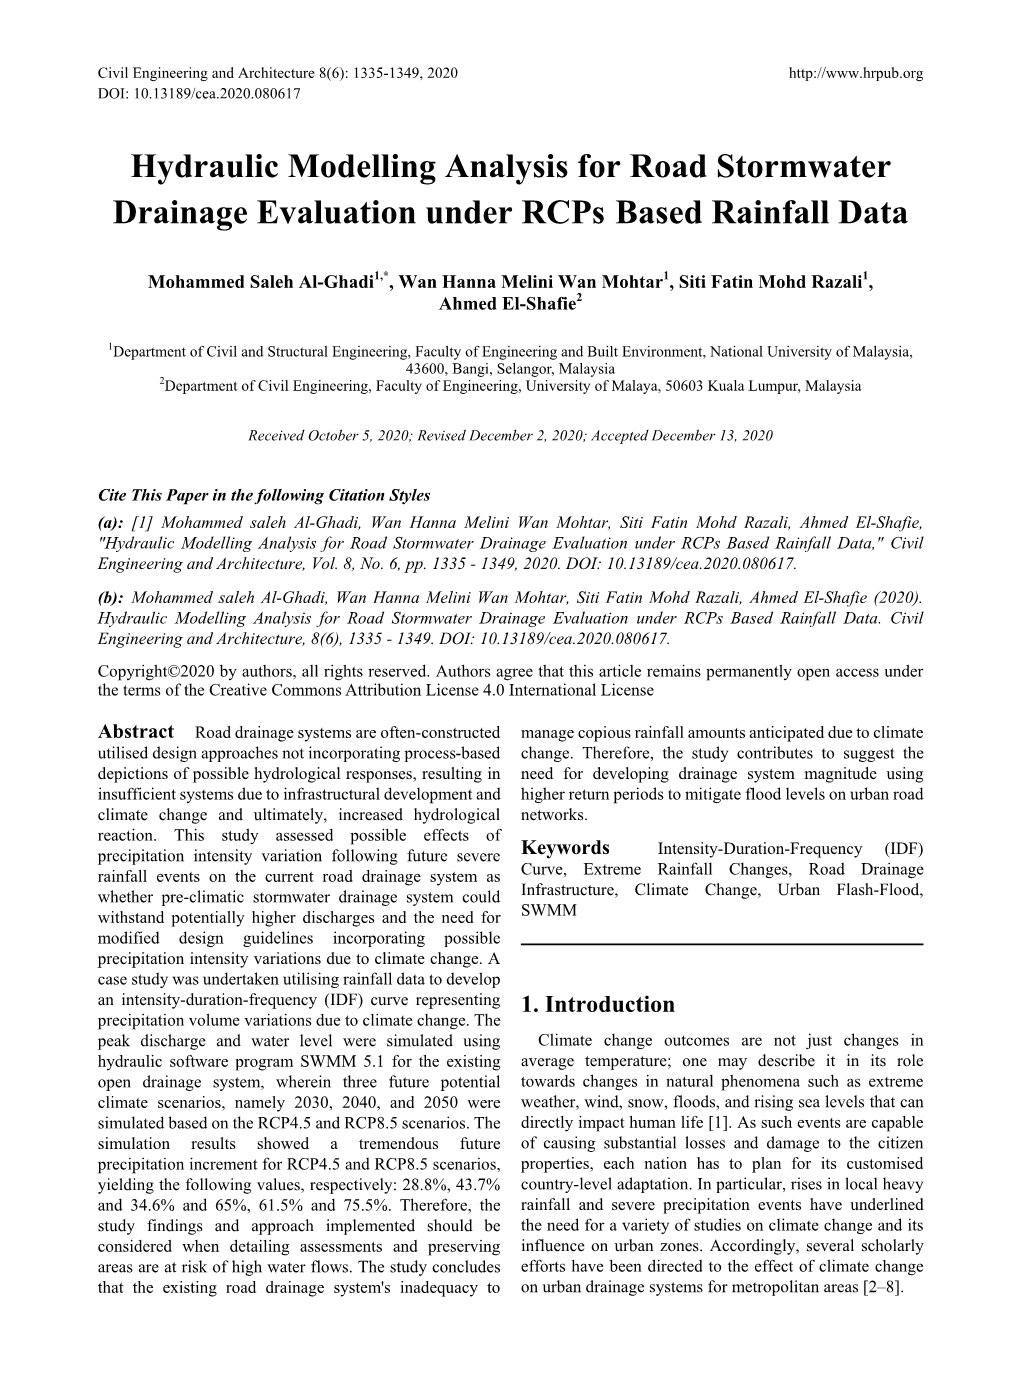 Hydraulic Modelling Analysis for Road Stormwater Drainage Evaluation Under Rcps Based Rainfall Data